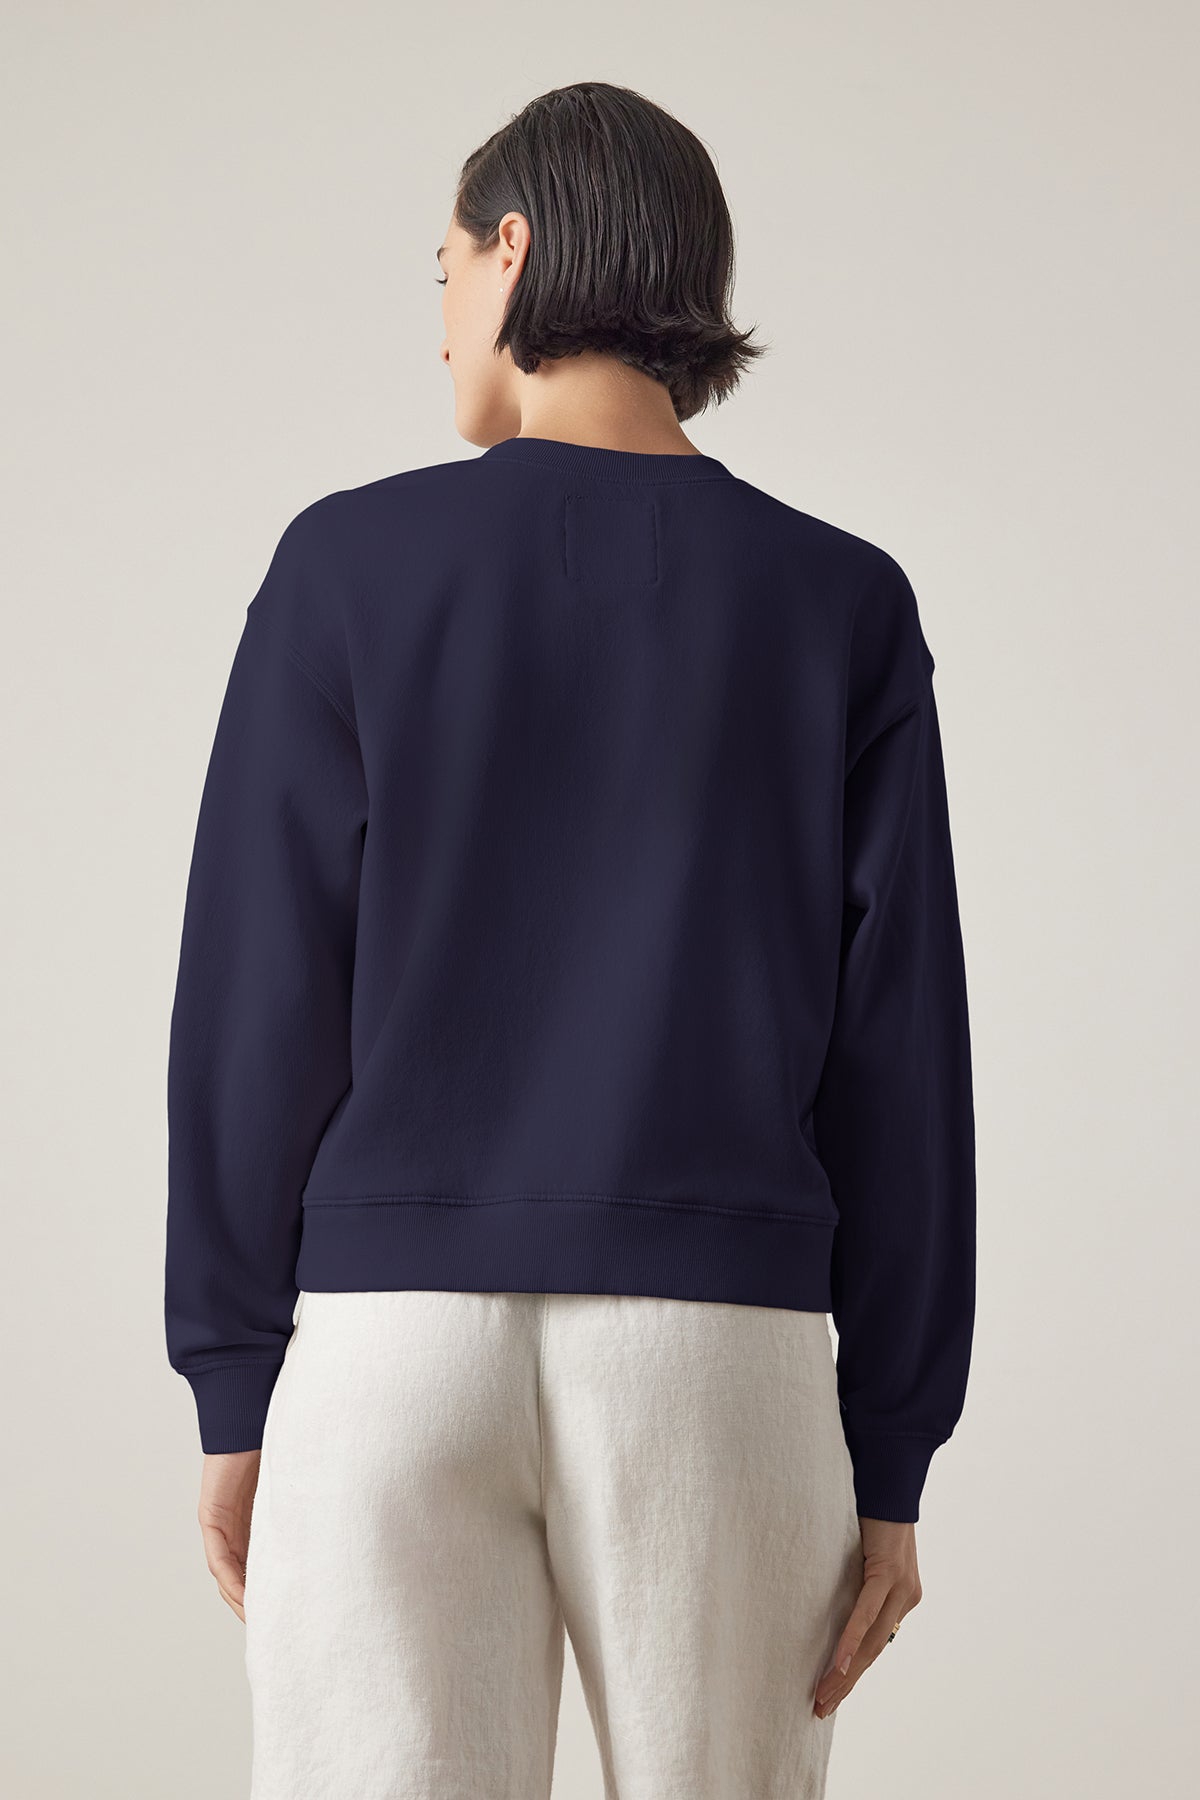 A woman seen from behind wearing a YNEZ SWEATSHIRT made by Velvet by Jenny Graham, made of organic fleece and white pants against a neutral background.-36909403144385